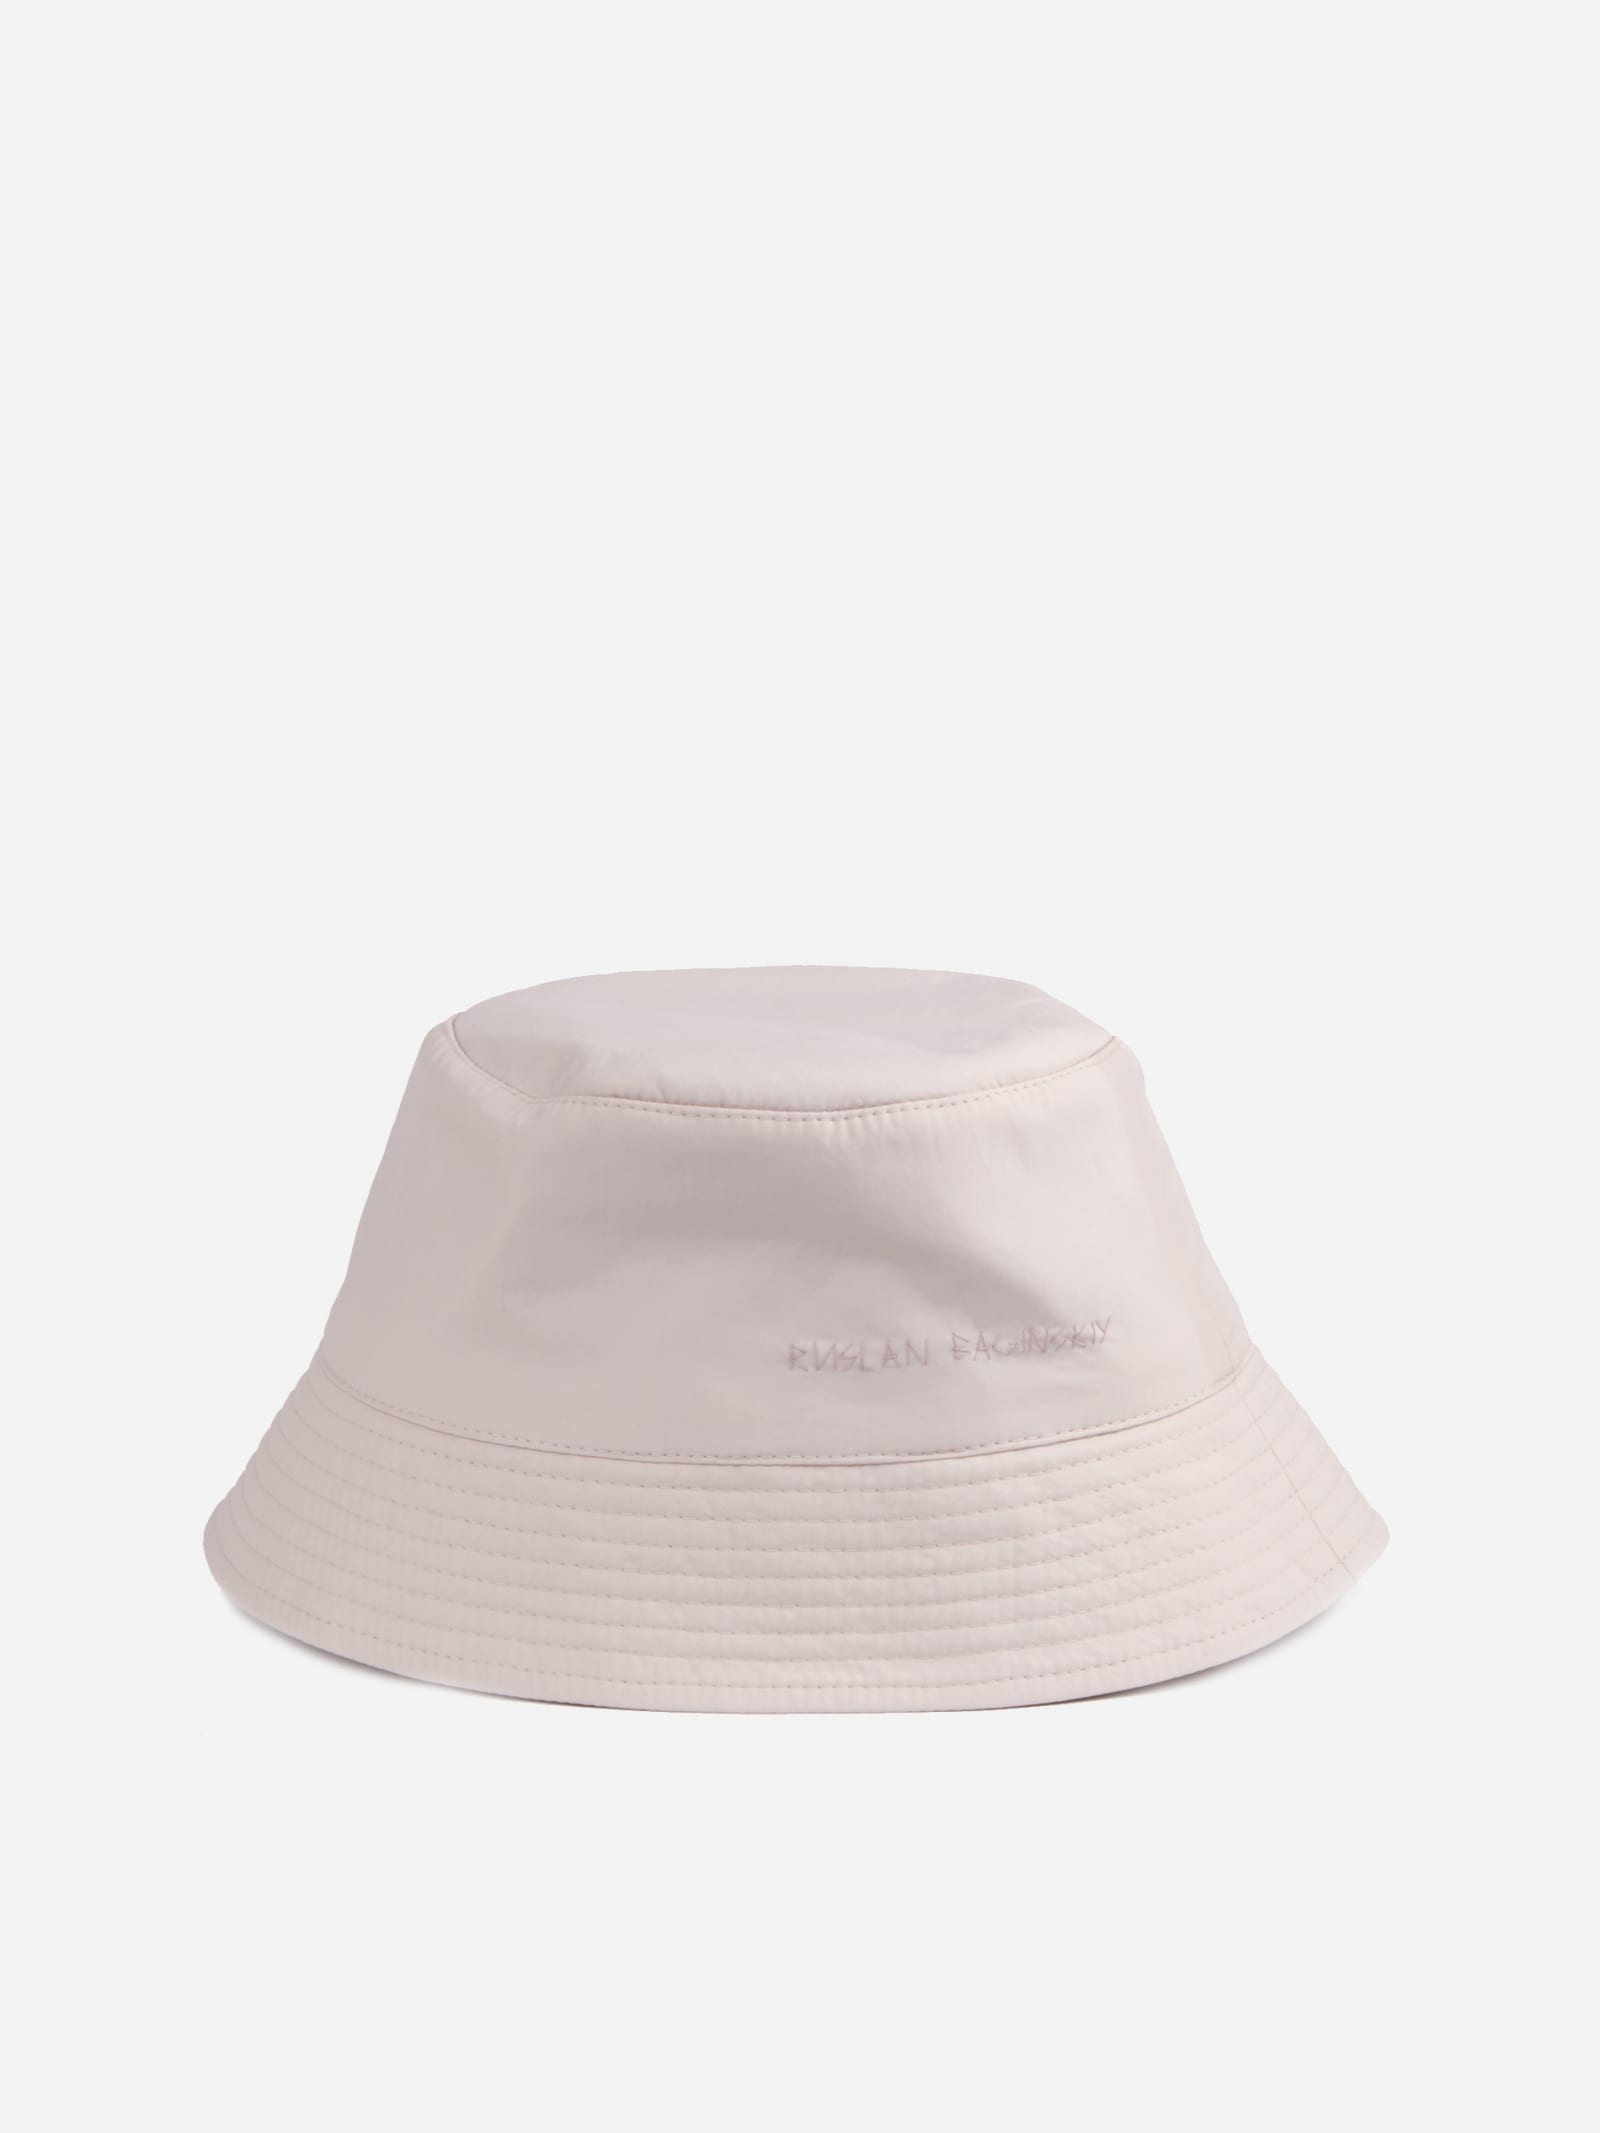 RUSLAN BAGINSKIY LAMPSHADE BUCKET HAT WITH EMBROIDERED LOGO,BCT039 -LIGHT PINK